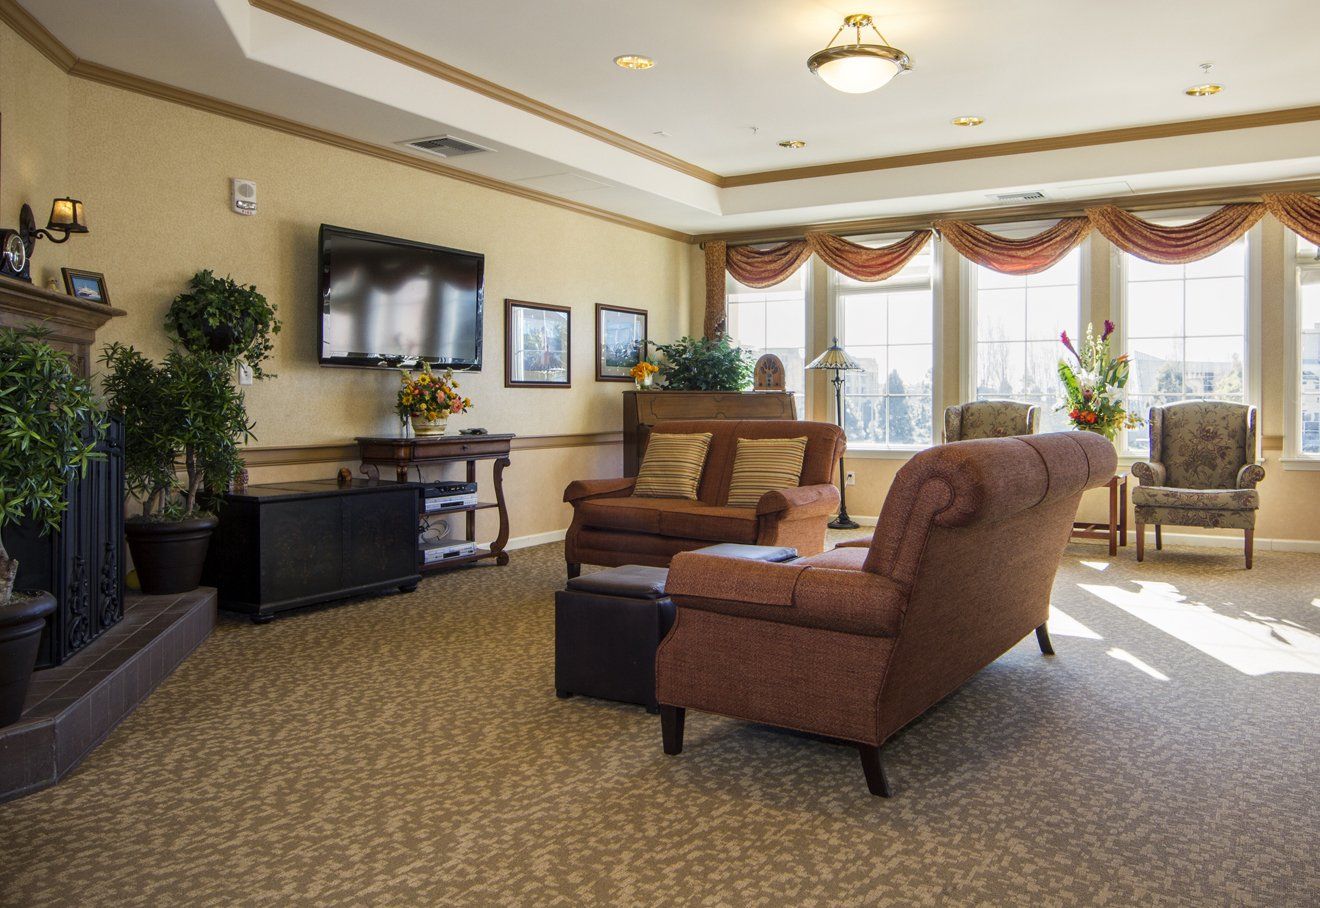 Interior of a living room at Ivy Park senior living community, featuring modern decor and furniture.